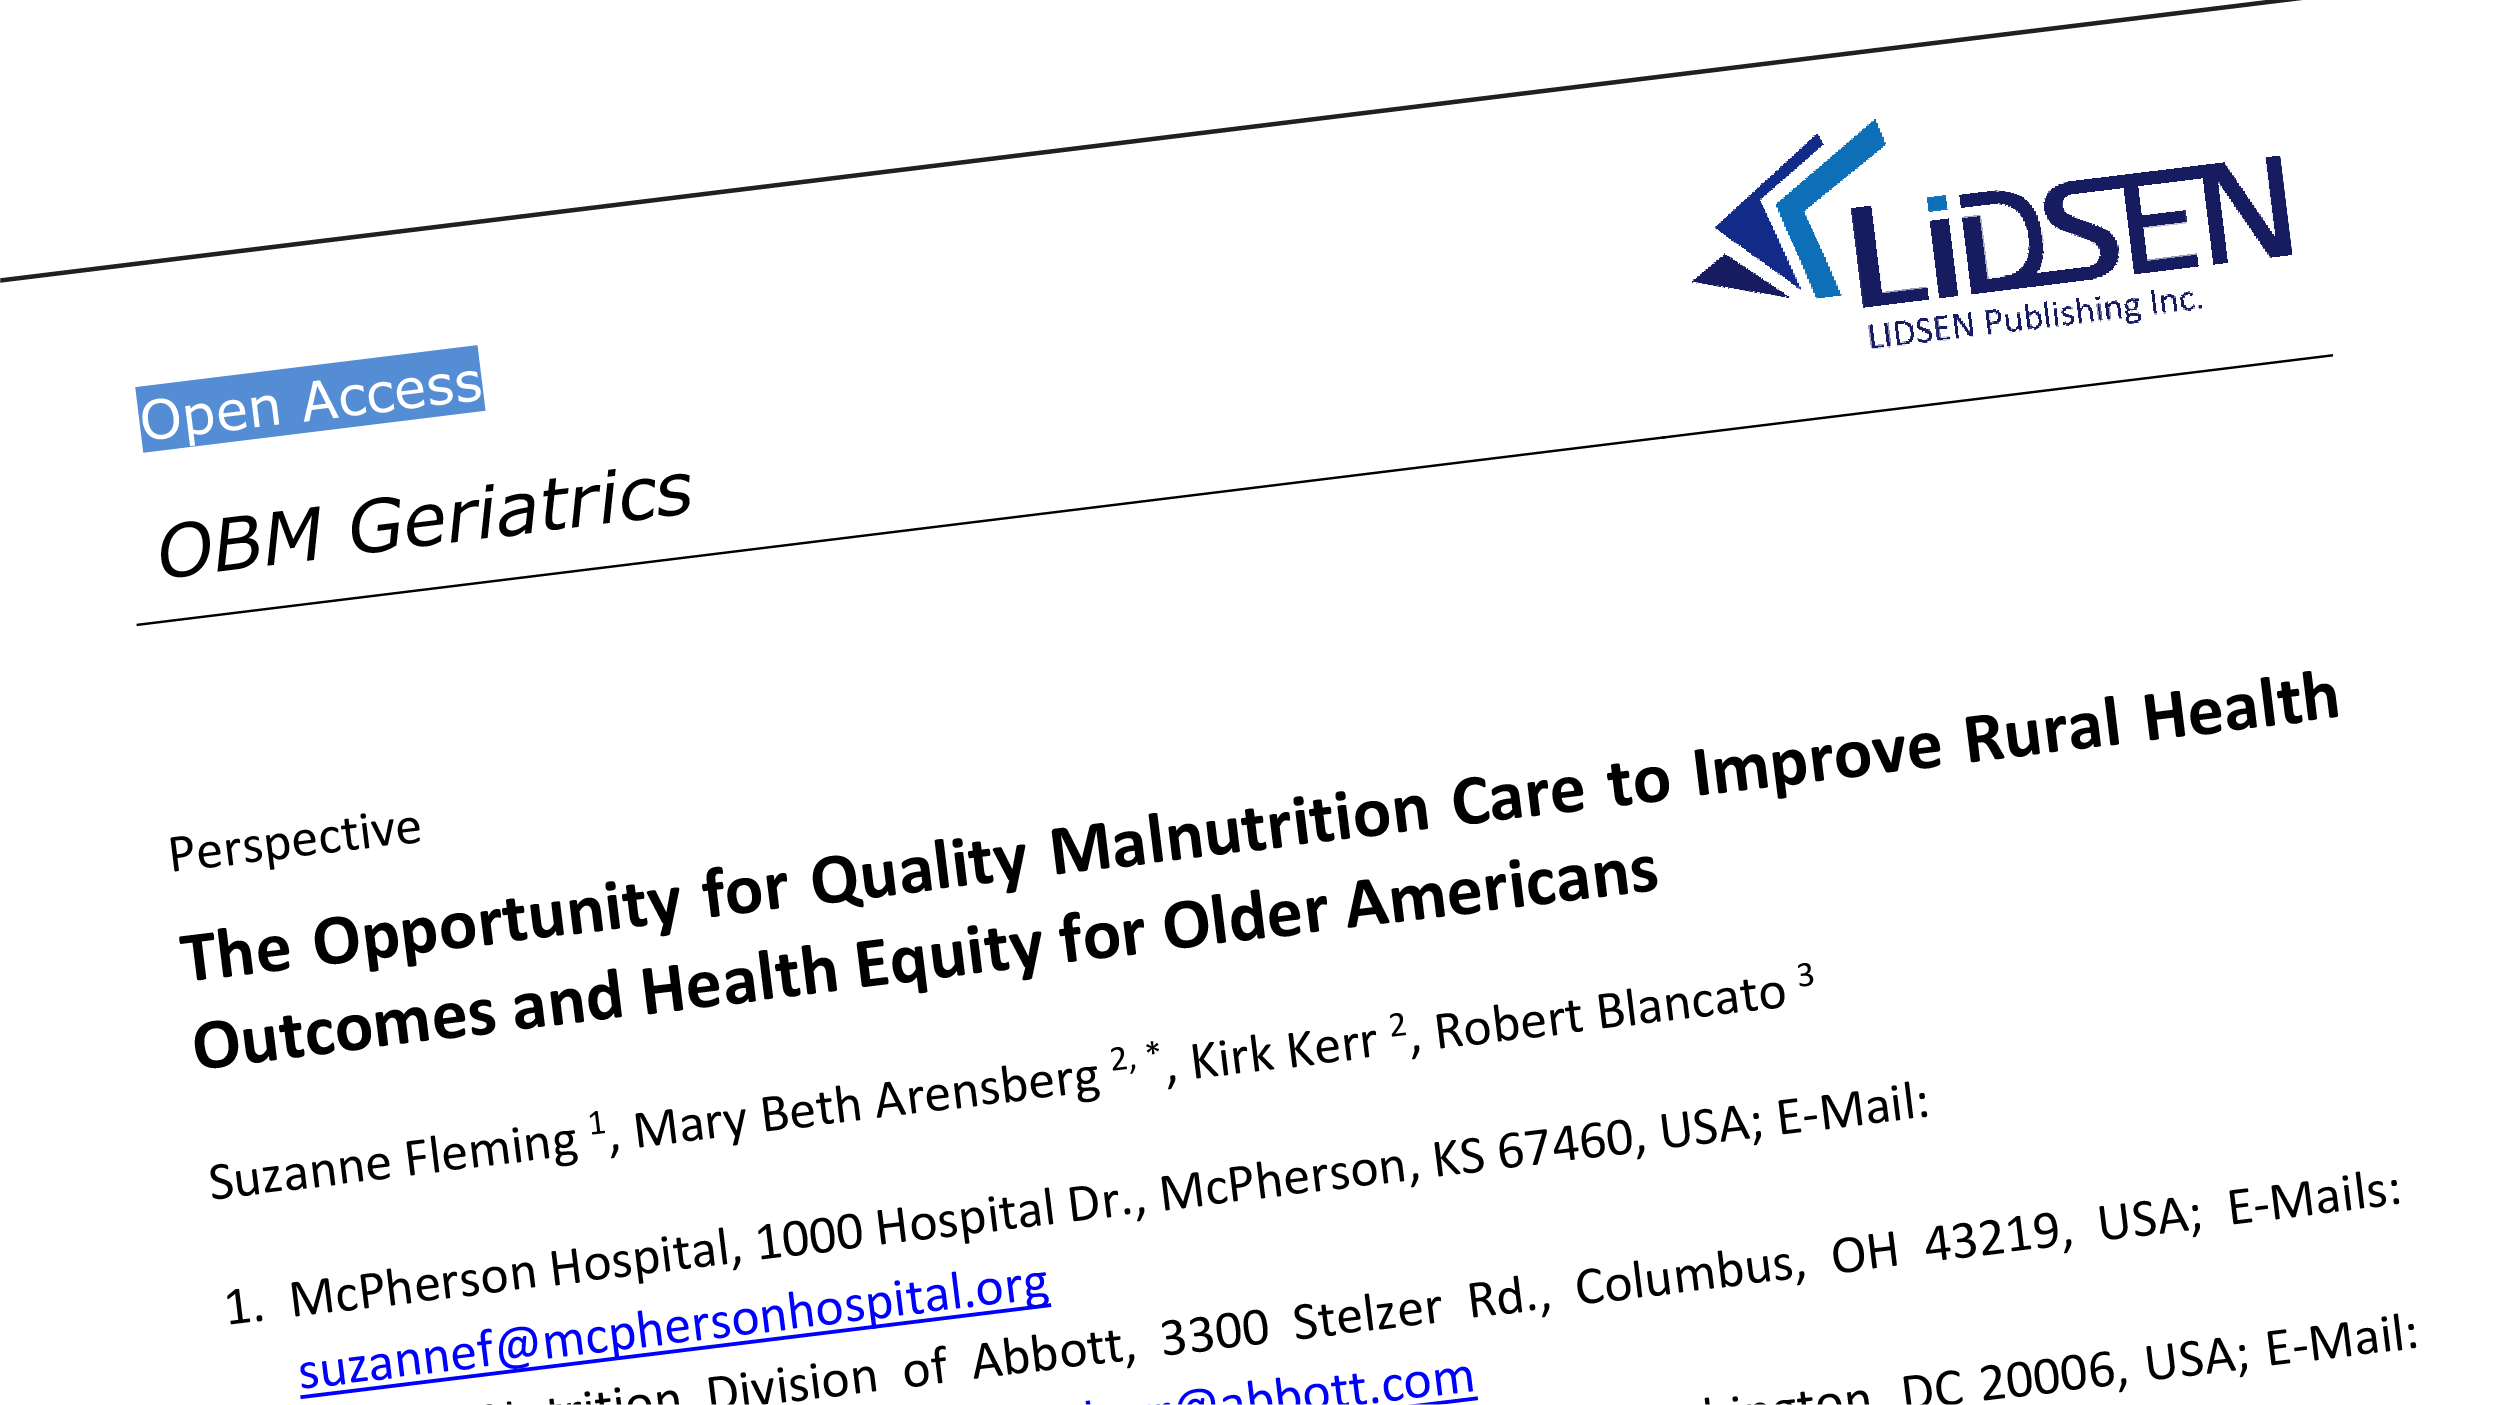 A partial image of the infographic, “Opportunity for Quality Malnutrition Care to Improve Rural Health Outcomes, Health Equity for Older Americans”